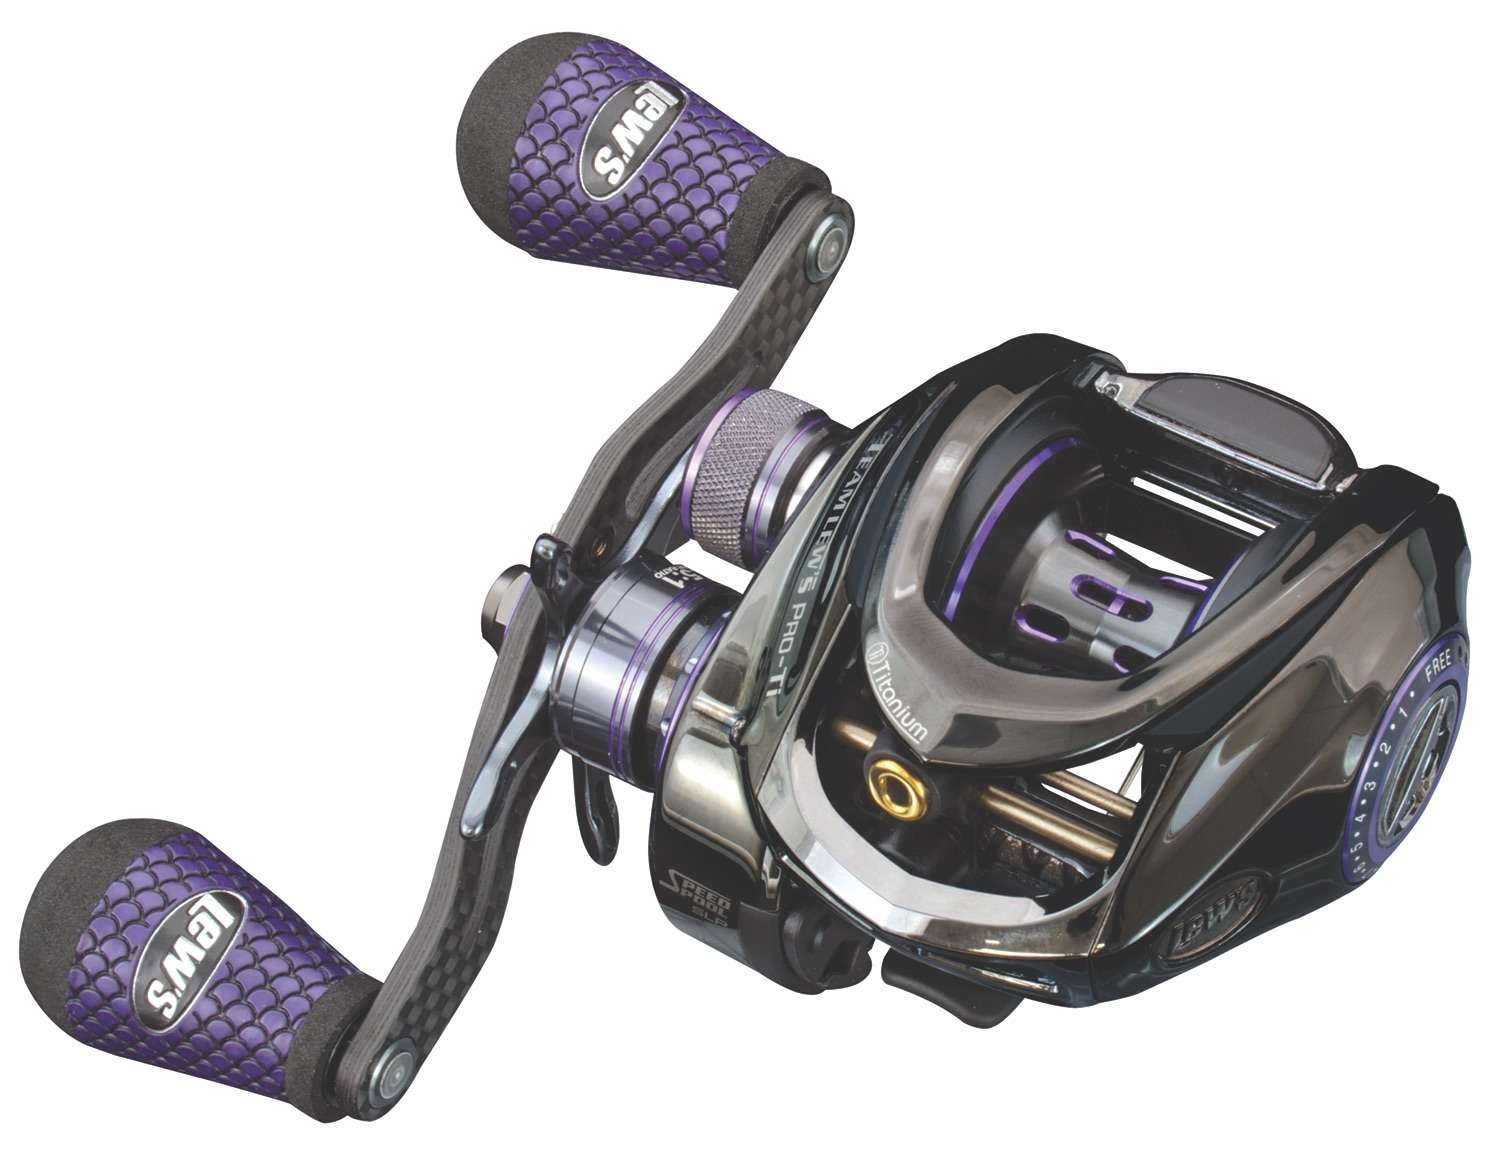 Pro-Ti SLP<br>
Lews<br>
$349.95<br>
Combining a one-piece aluminum frame and aluminum side plates with Titanium composition, this reel is the lightest, toughest reel ever produced by the legendary Lewâs brand to date. Hard aluminum alloy Speed Gears that have been cut on the finest Hamai CNC gear hobbing machine provide precision gear mesh that maximizes smoothness and durability. A premium 11 bearing system with double-shielded Stainless-Steel ball bearings and a Zero Reverse one-way clutch bearing add to the smoothness and durability of this reel.
<br><br>
Not only is the new Pro-Ti SLP light and tough, but itâs also extremely user friendly to make the
anglerâs day on the water a success. The proprietary brake shoe geometry of the externally adjustable six-pin, 27-position QuietCast Adjustable Centrifugal Braking System (ACB) means a quieter and smoother braking system. The exclusive and patented Speed Dial line indicator means no more forgetting what type of line is spooled on each reel, and the patented Speed Keeper hook keeper provides a convenient place to keep baits at the ready when not in use.

